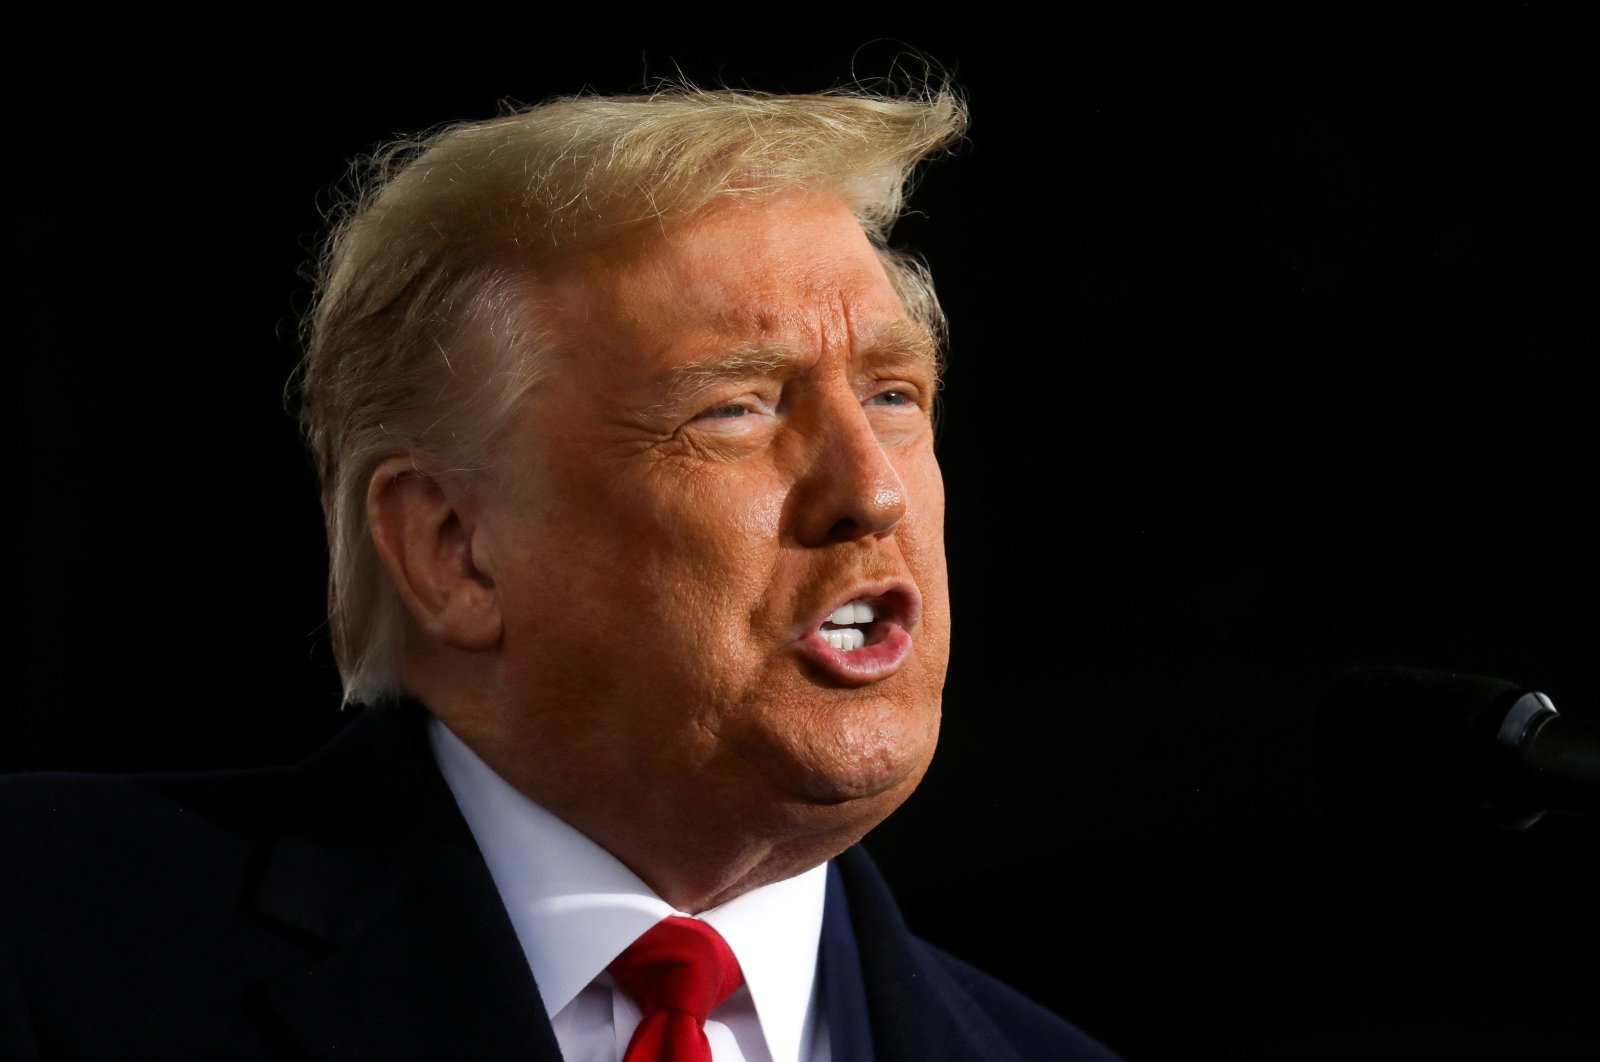 U.S. President Donald Trump speaks during a campaign event, in Allentown, Pennsylvania, U.S., October 26, 2020. (Reuters Photo)